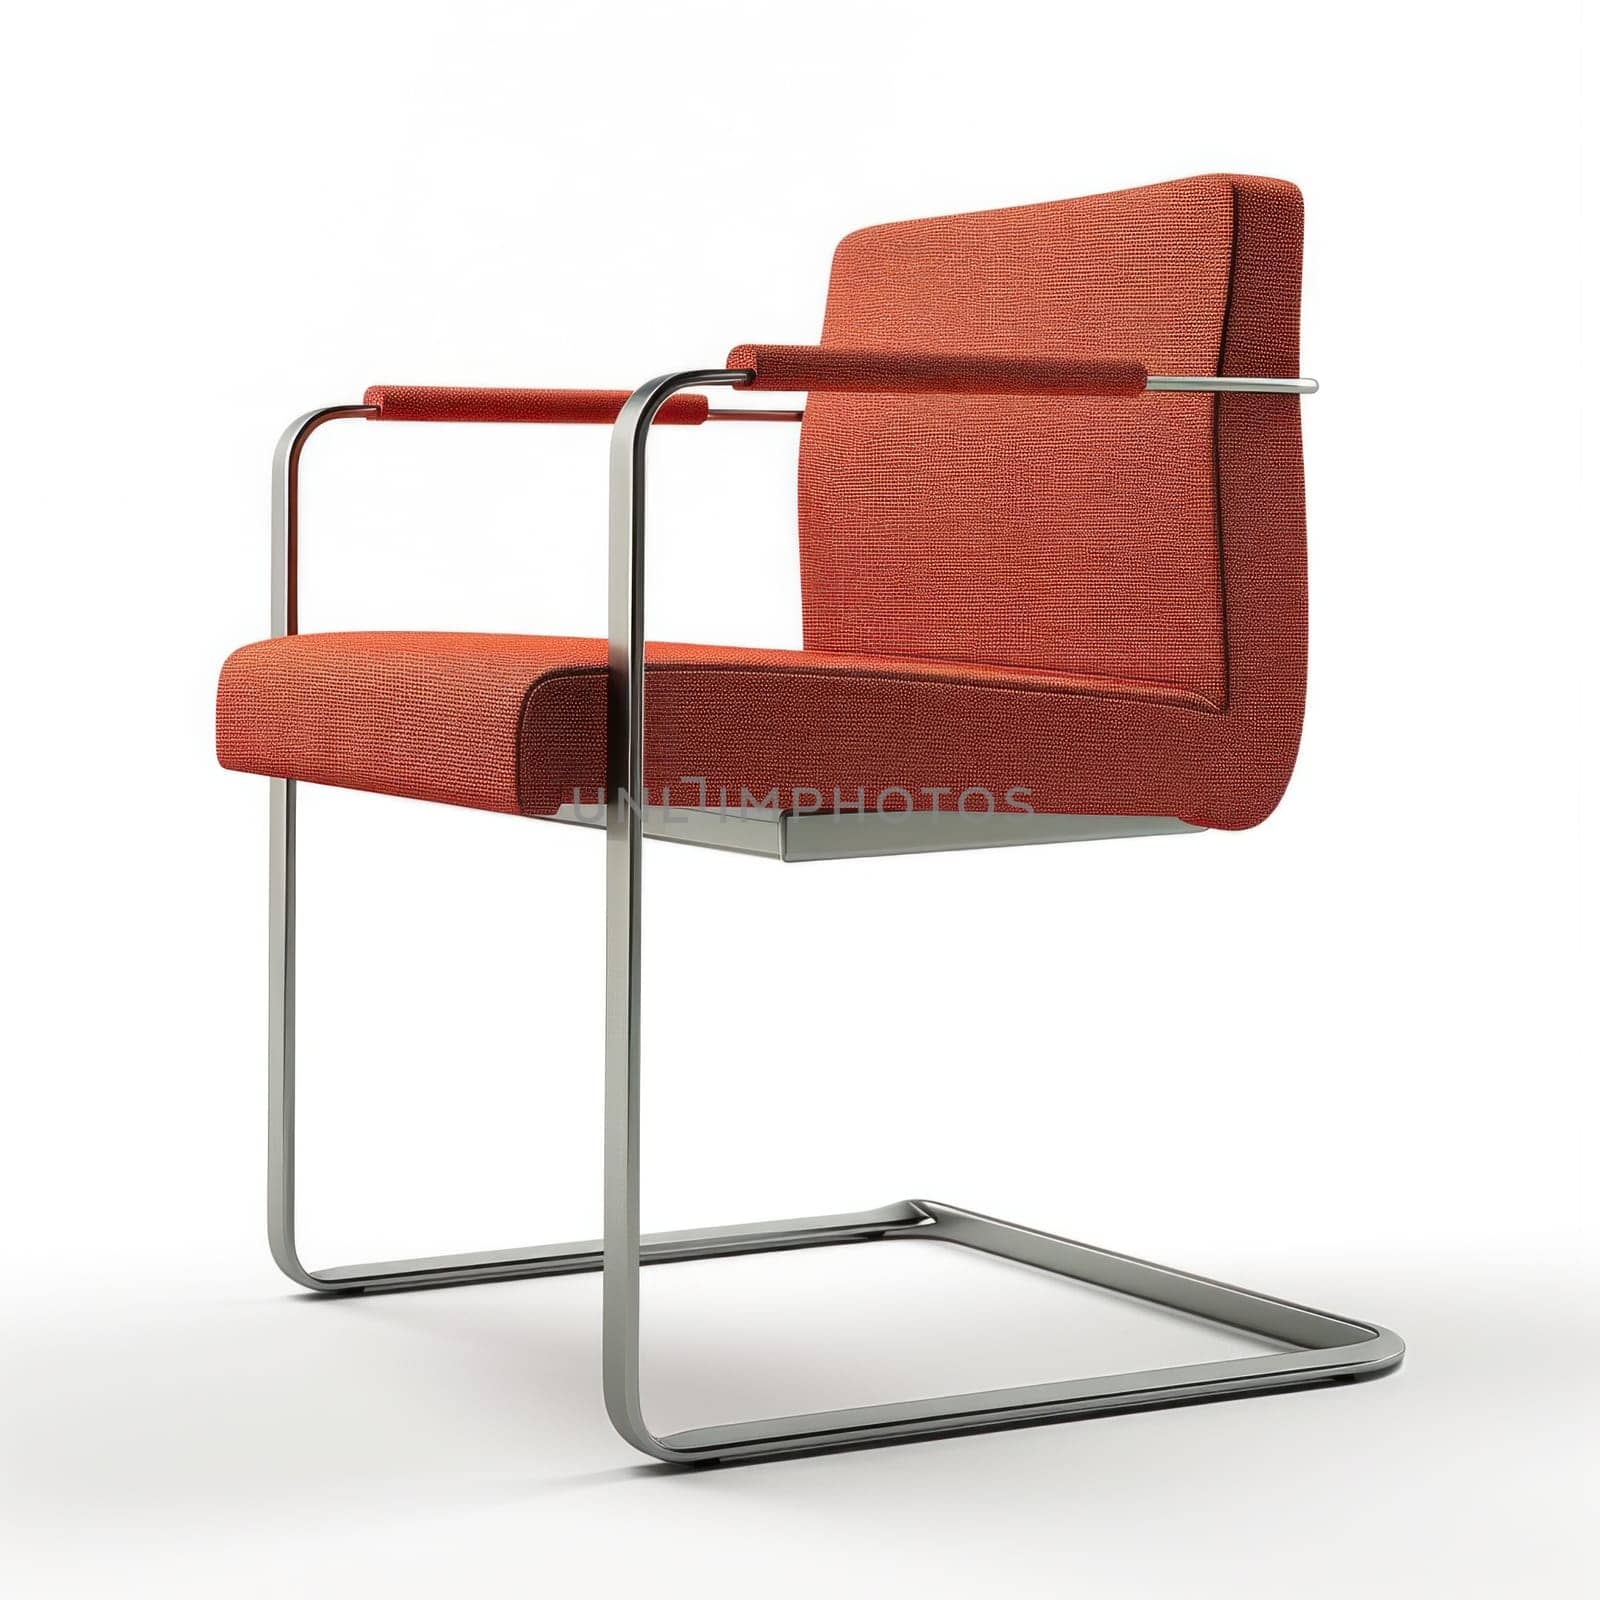 A modern chair with a metal frame and orange fabric